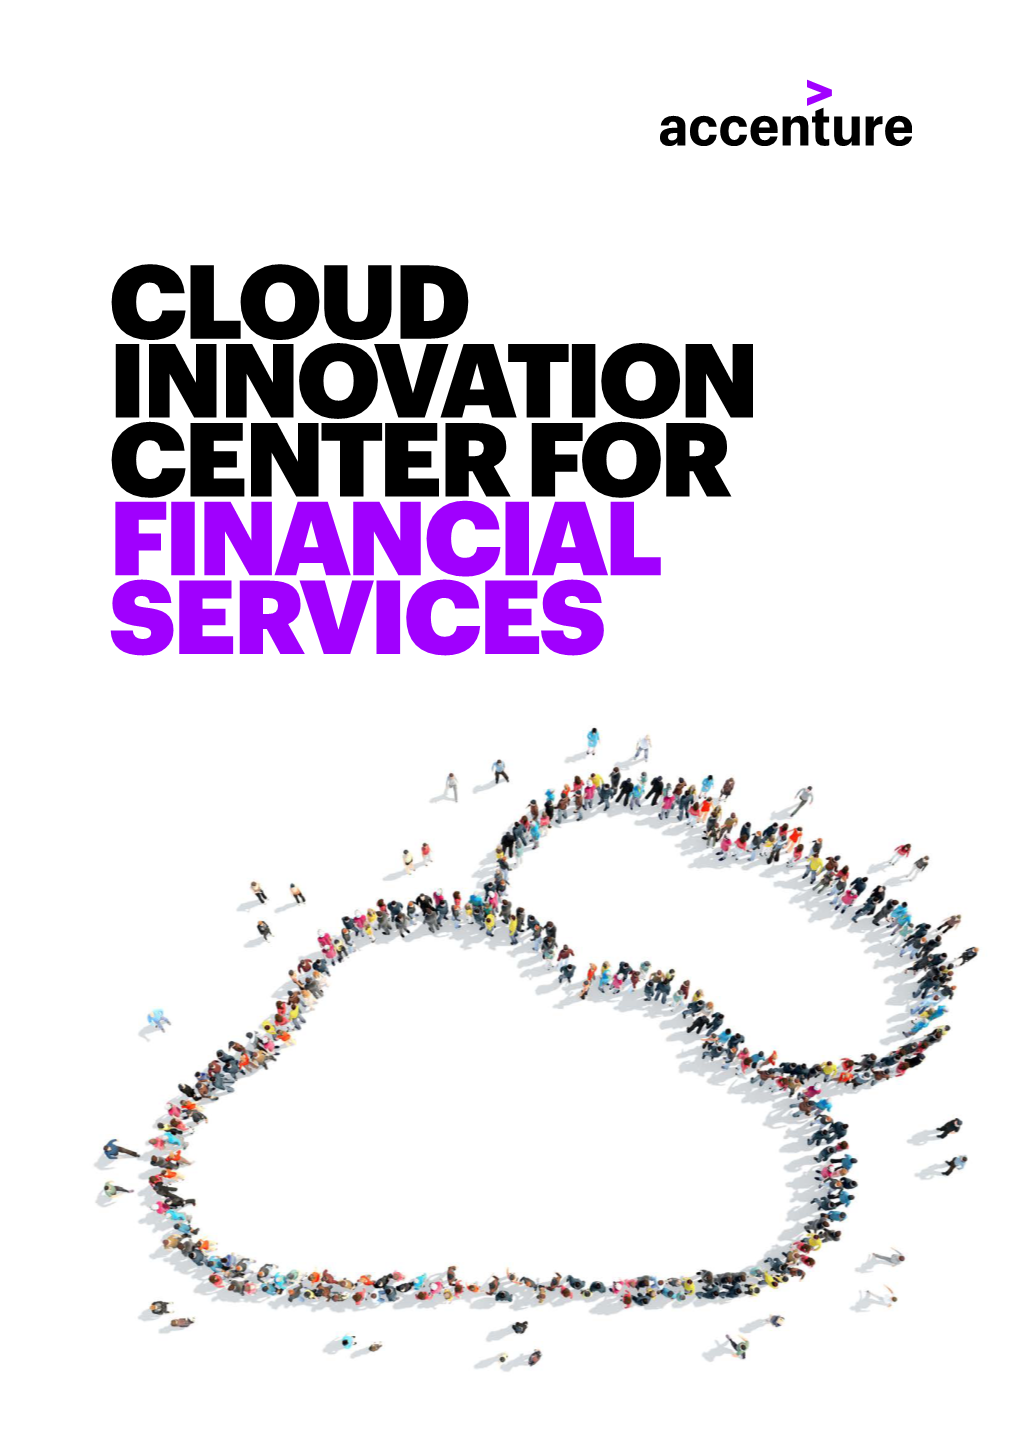 Cloud Innovation Center for Financial Services the Accenture Cloud Innovation Center for Financial Services